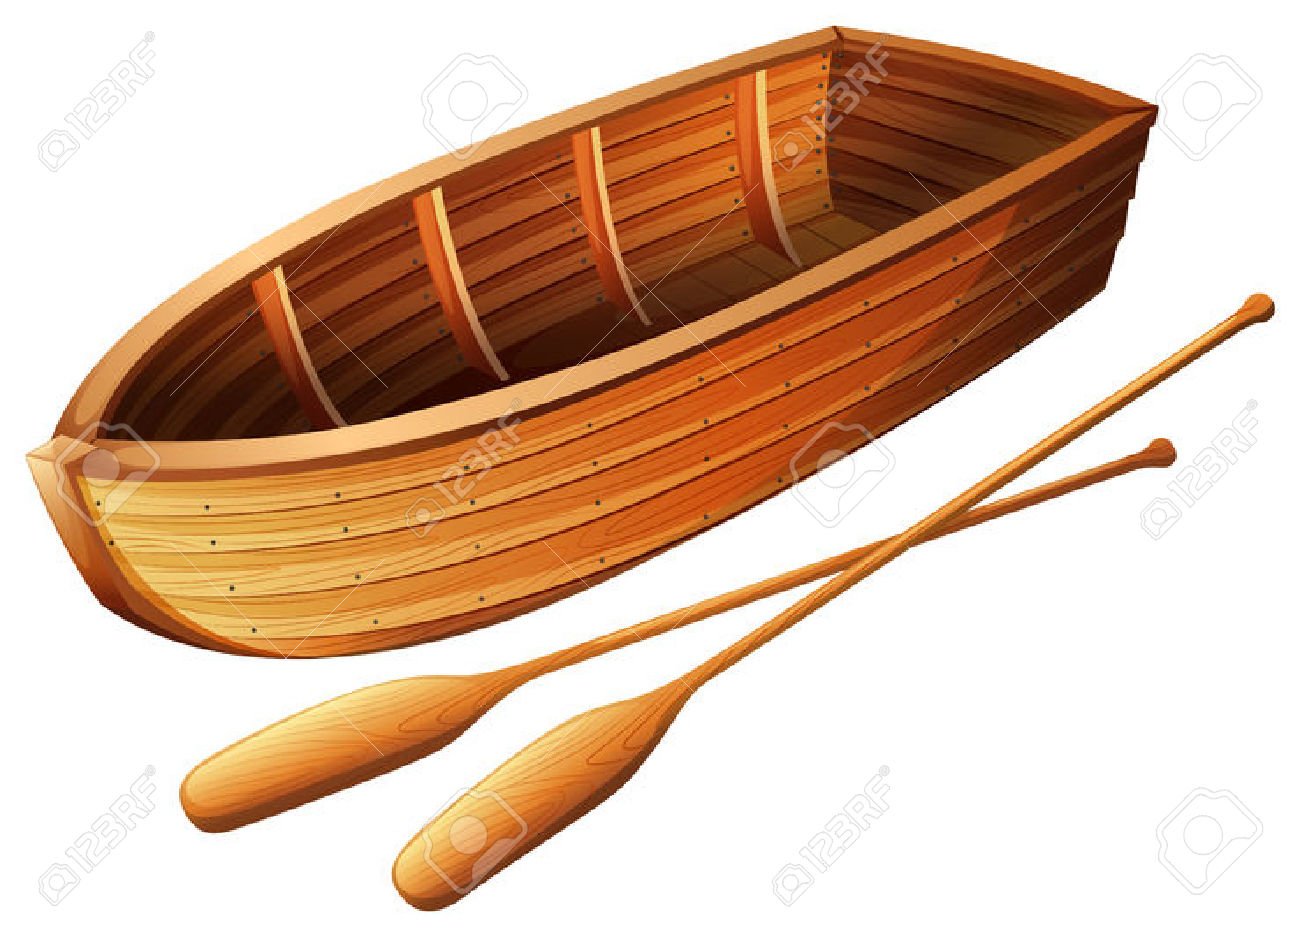 Wooden Boat On White Illustration Royalty Free Cliparts, Vectors.